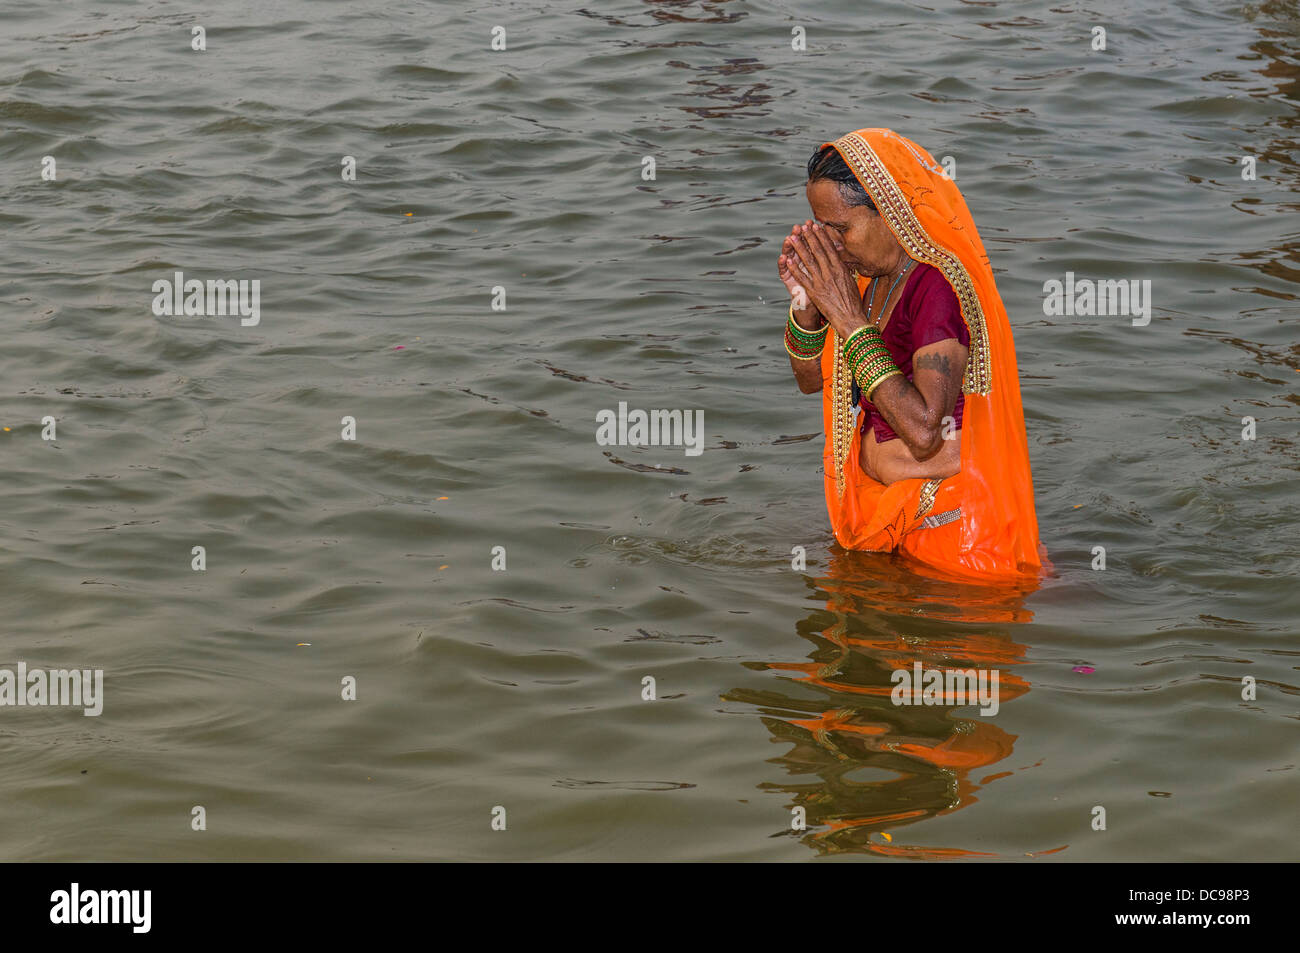 Woman wearing an orange sari taking a bath in the Sangam, the confluence of the rivers Ganges, Yamuna and Saraswati, in the Stock Photo